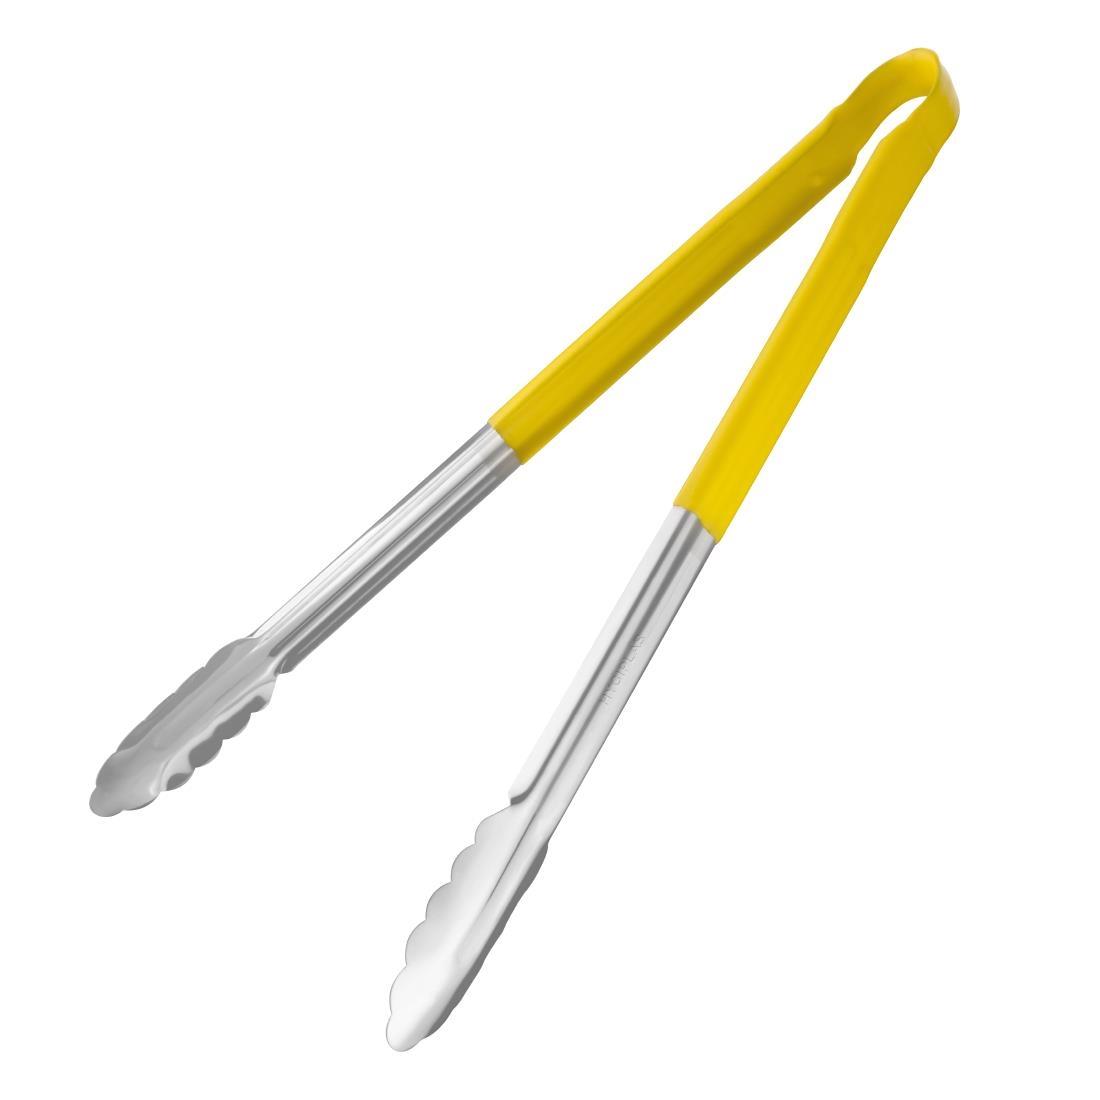 Hygiplas Colour Coded Serving Tong Yellow 405mm - HC855  - 1